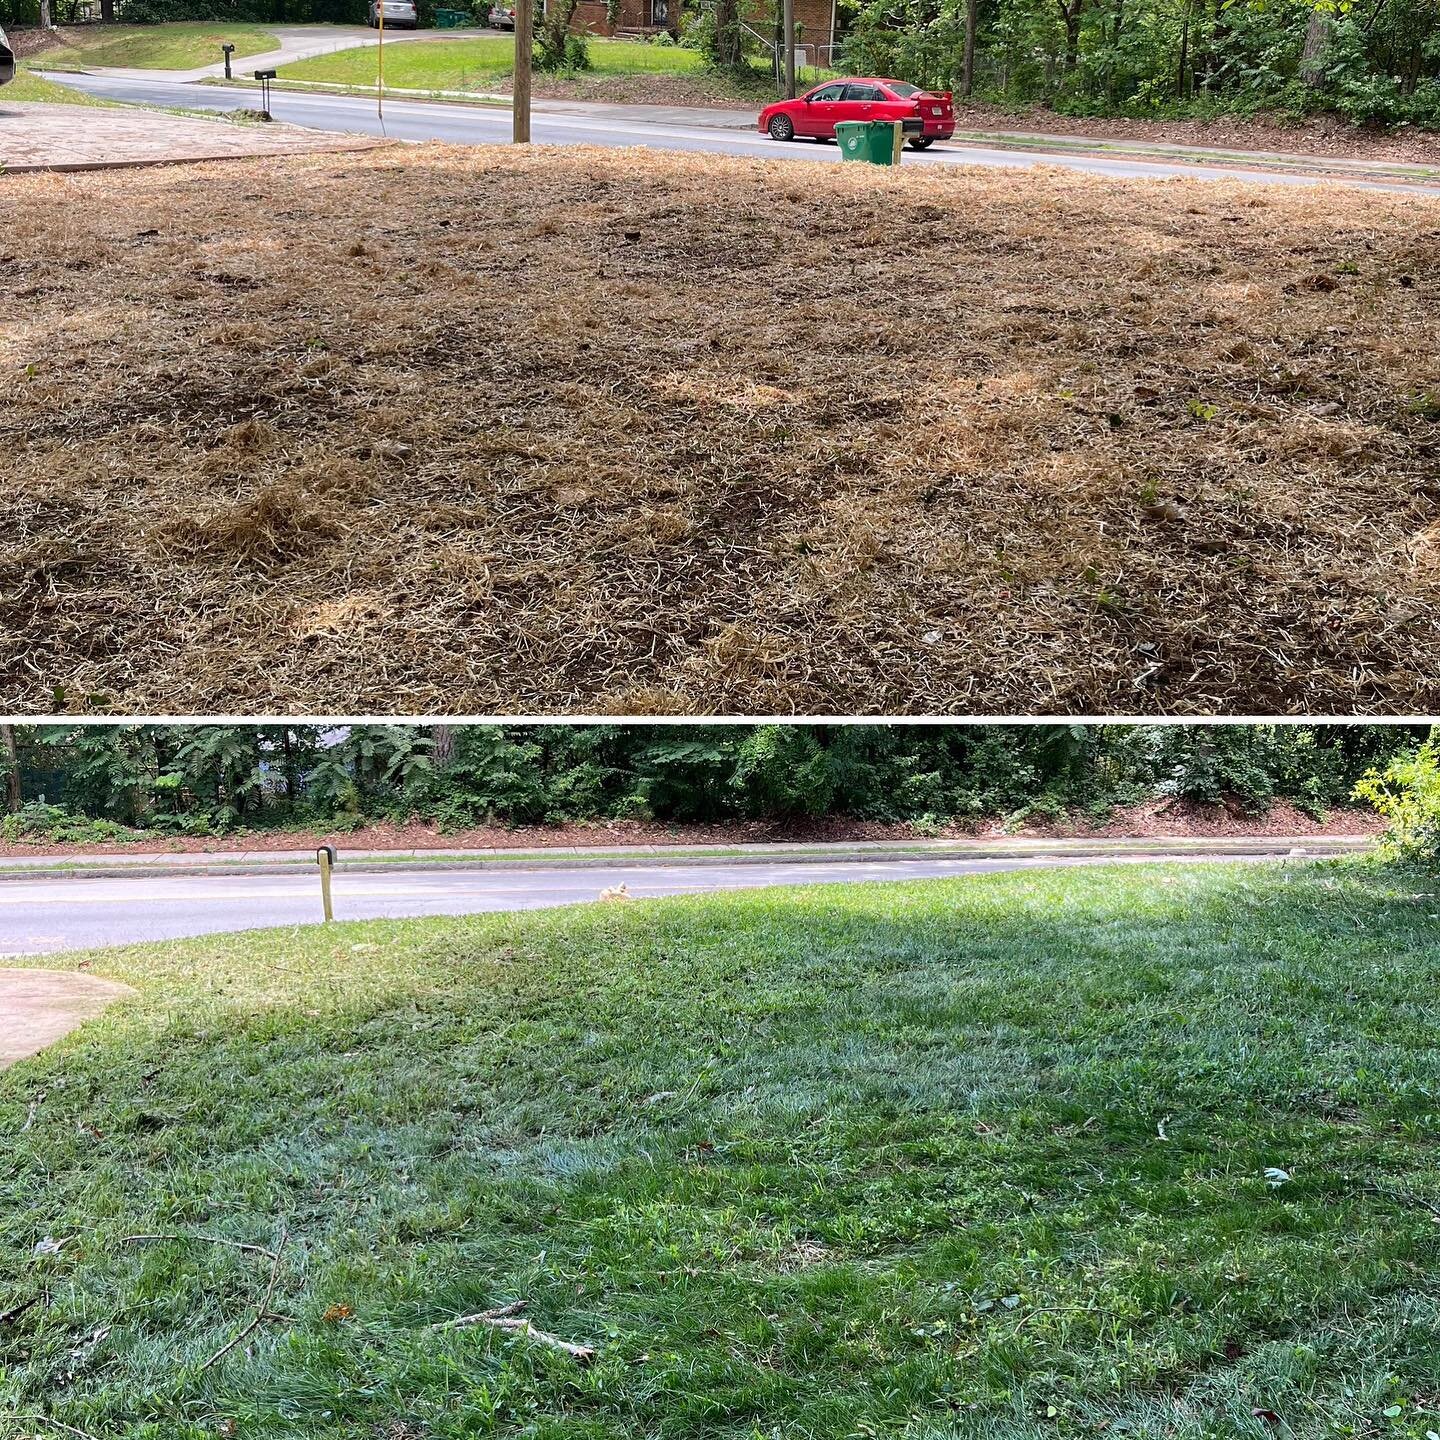 What a little seed will do! New yard by Spencer 🌱
.
.
#landscaping #atlantalandscaper #atlantalandscaping #grass #beforeandafter #atl #atlanta